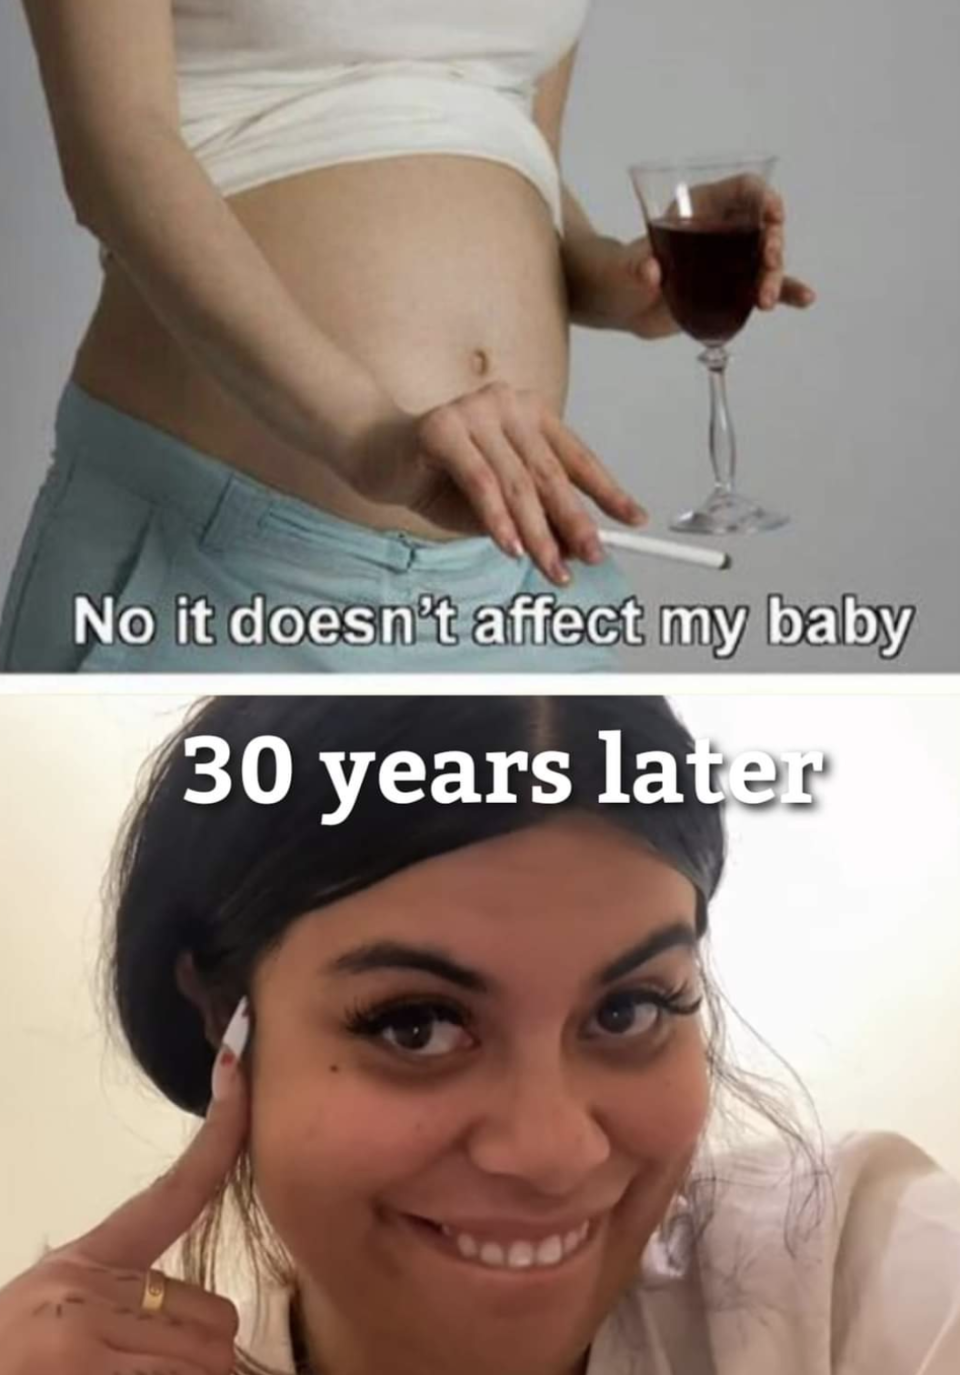 Drew Afualo meme showing a pregnant person holding a glass of wine and a cigarette with caption "No it doesn't affect my baby," and then "30 years later," with a picture of Drew smiling